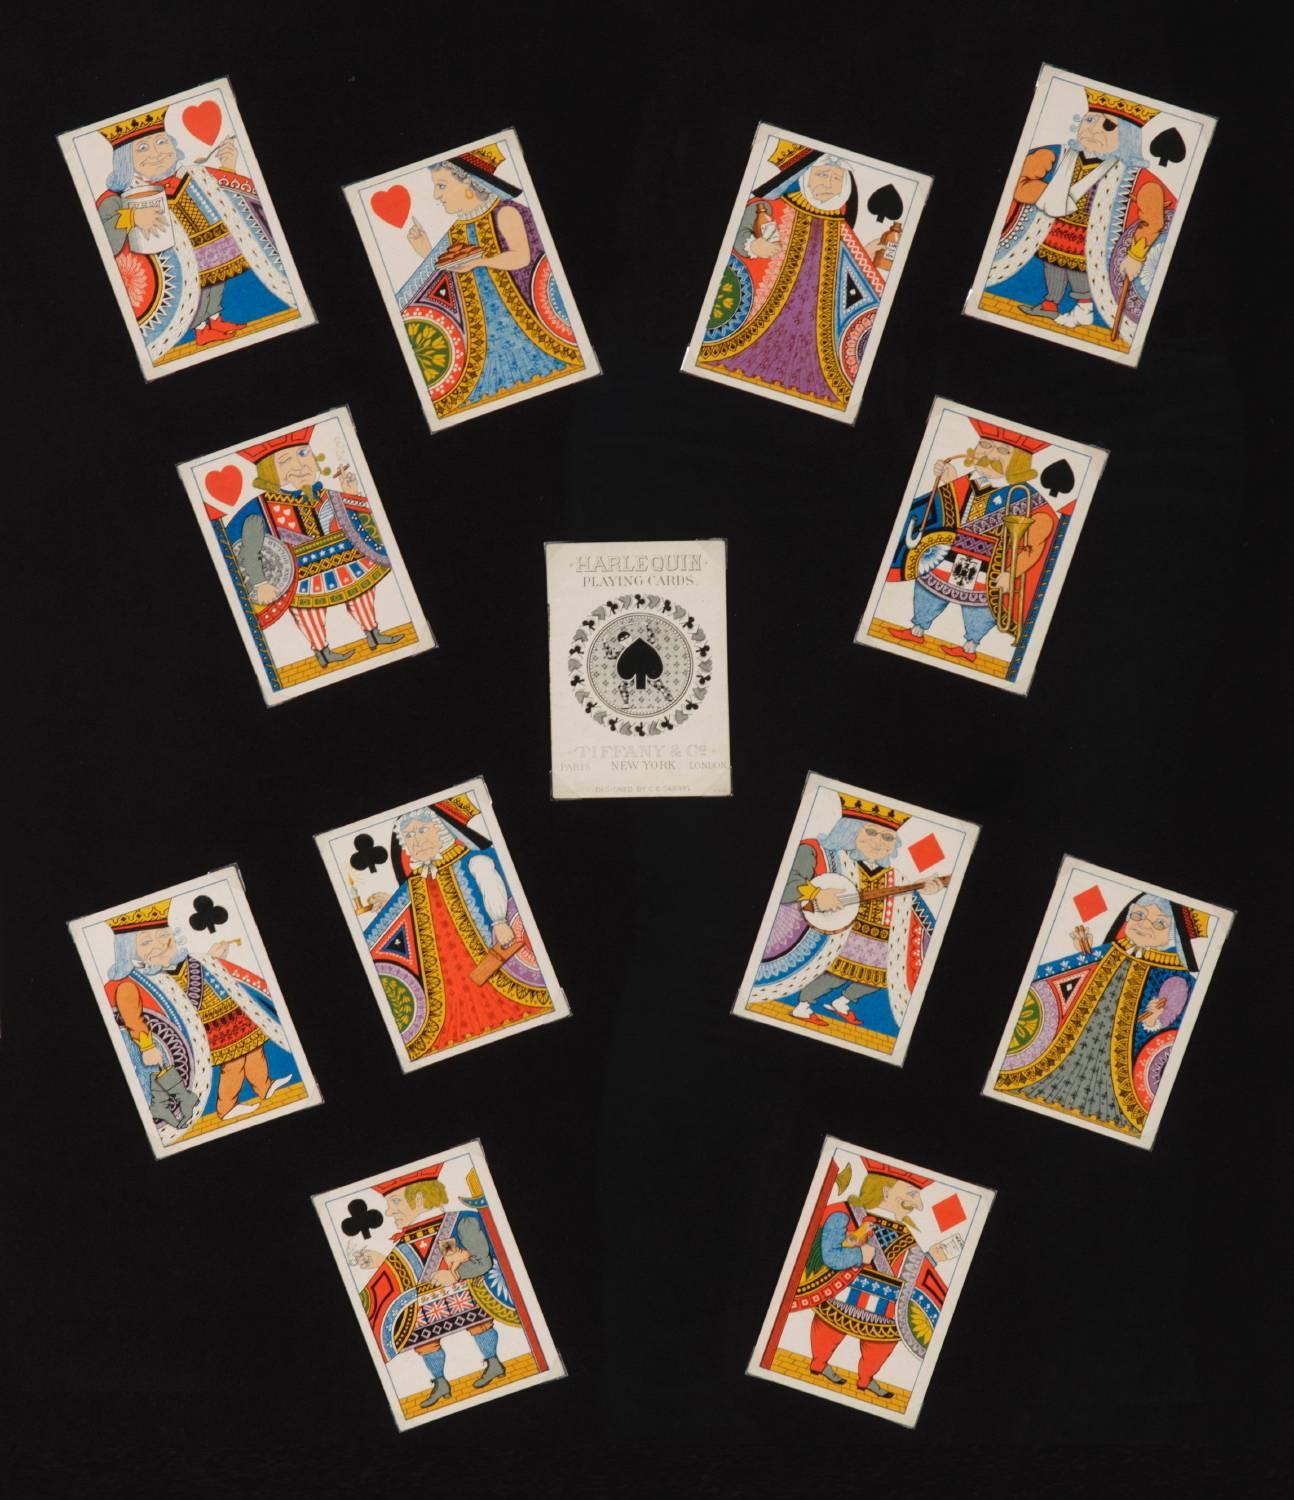 Antique playing cards by Tiffany & Company, circa 1879, Designed By Charles E. Carryl:

Fantastically graphic set of antique transformation playing cards, made by Tiffany & Company, circa 1879. Designed by Charles E. Carryl, this is a complete set